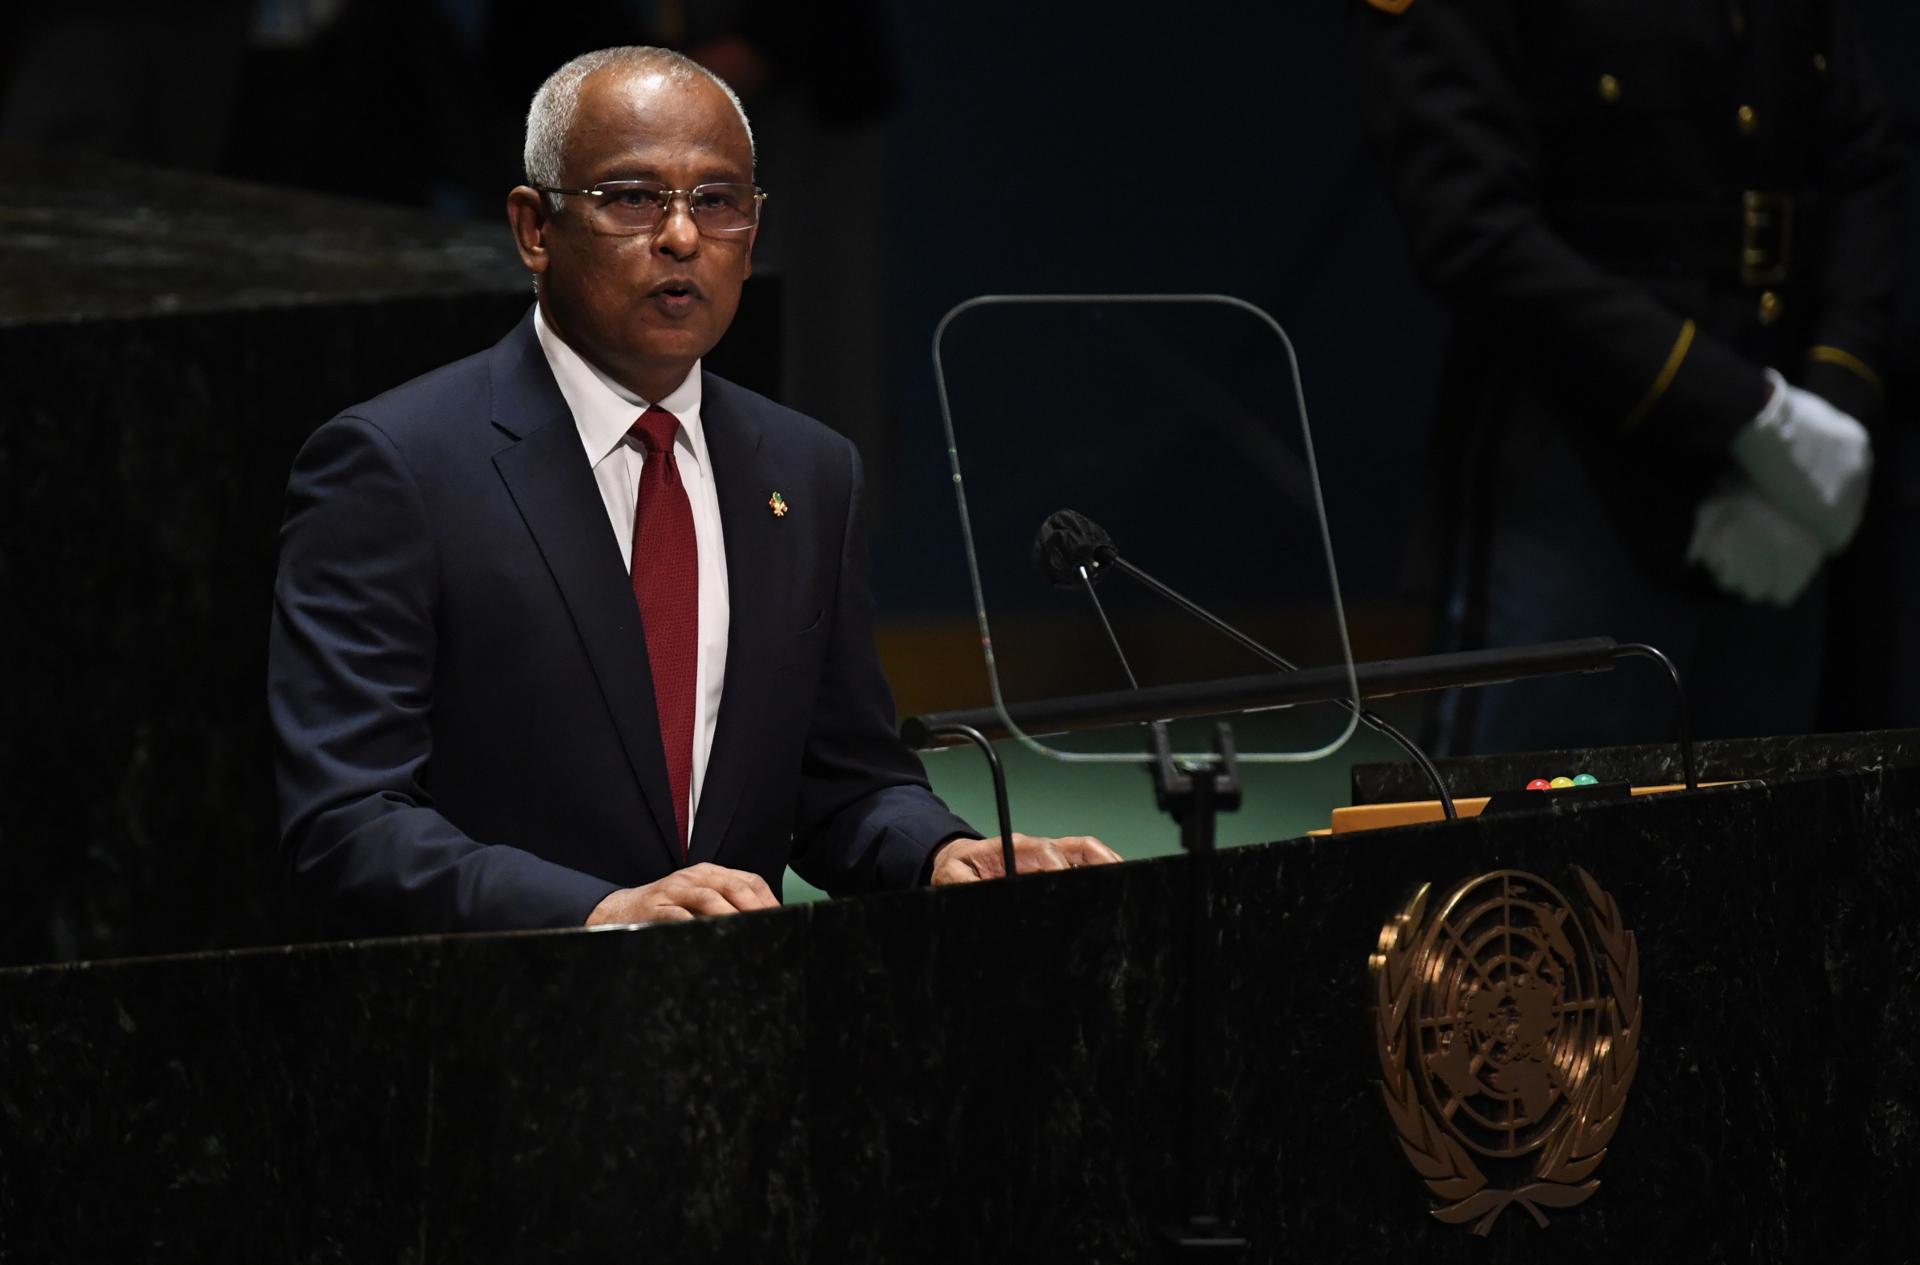 A file picture shows Maldives President Ibrahim Mohamed Solih addressing the UN General Assembly in New York City, USA. EFE/EPA/FILE/TIMOTHY A. CLARY / POOL